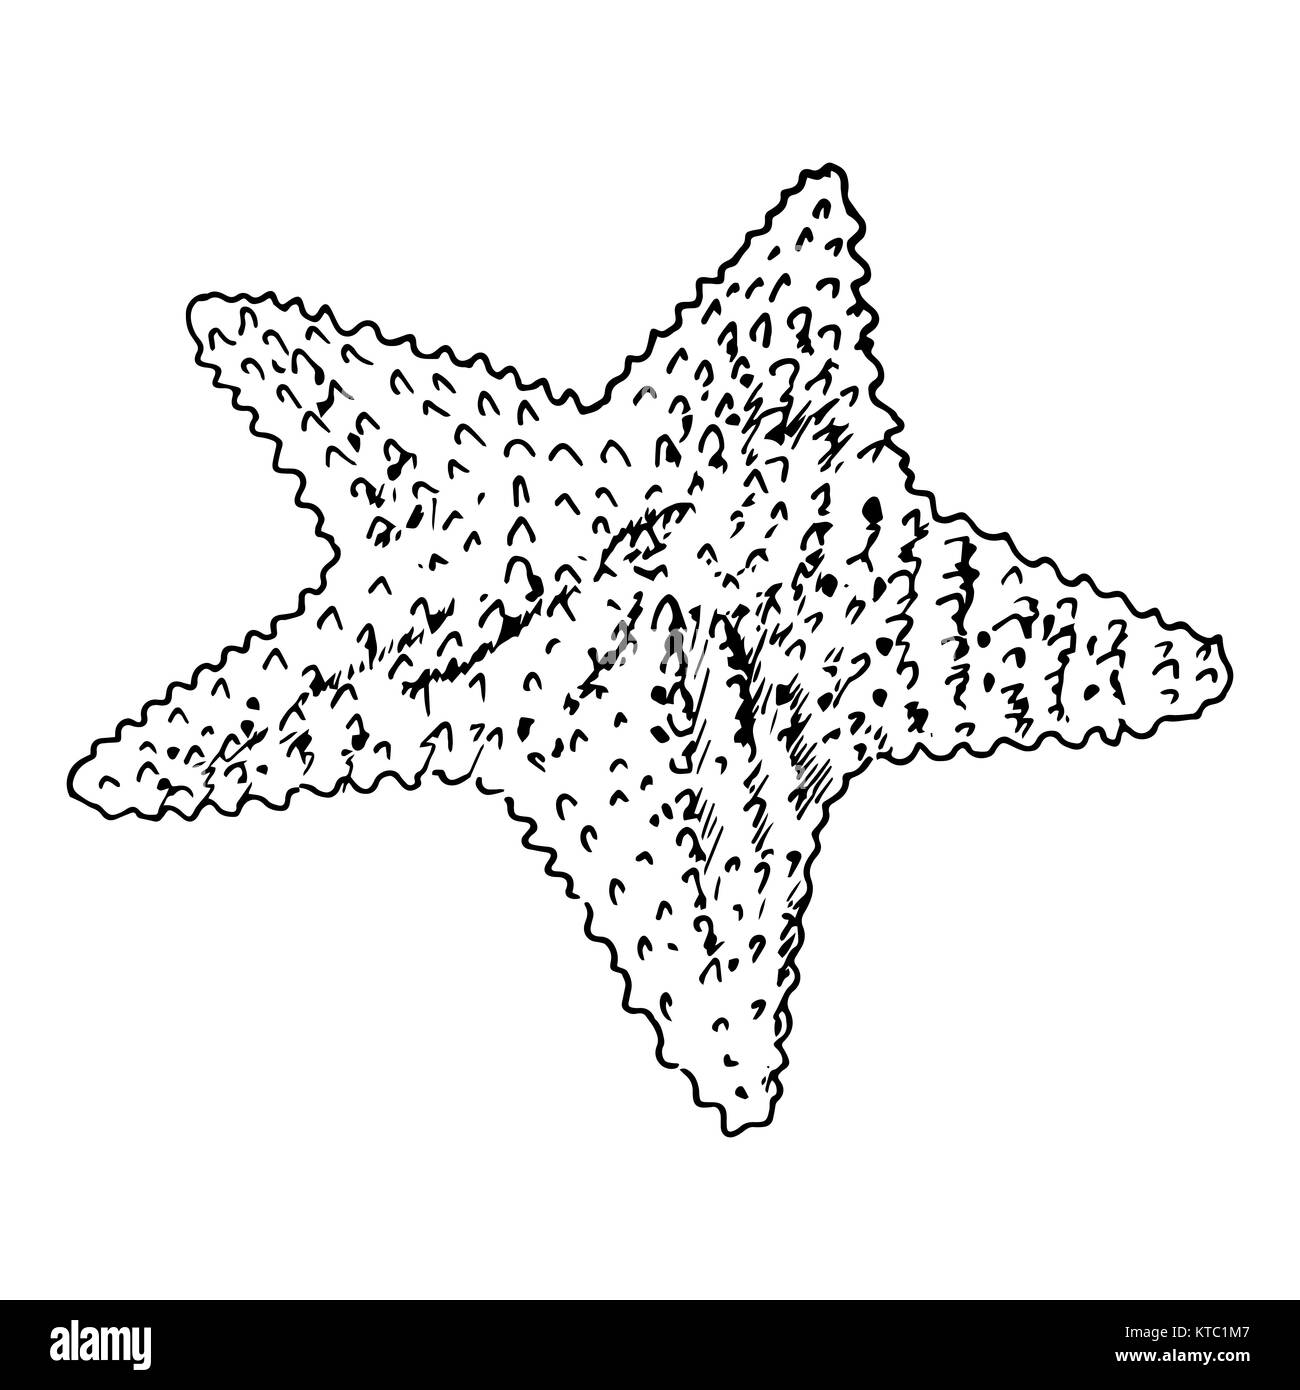 Starfish realistic sketch. Sea Star, isolated on white Stock Photo